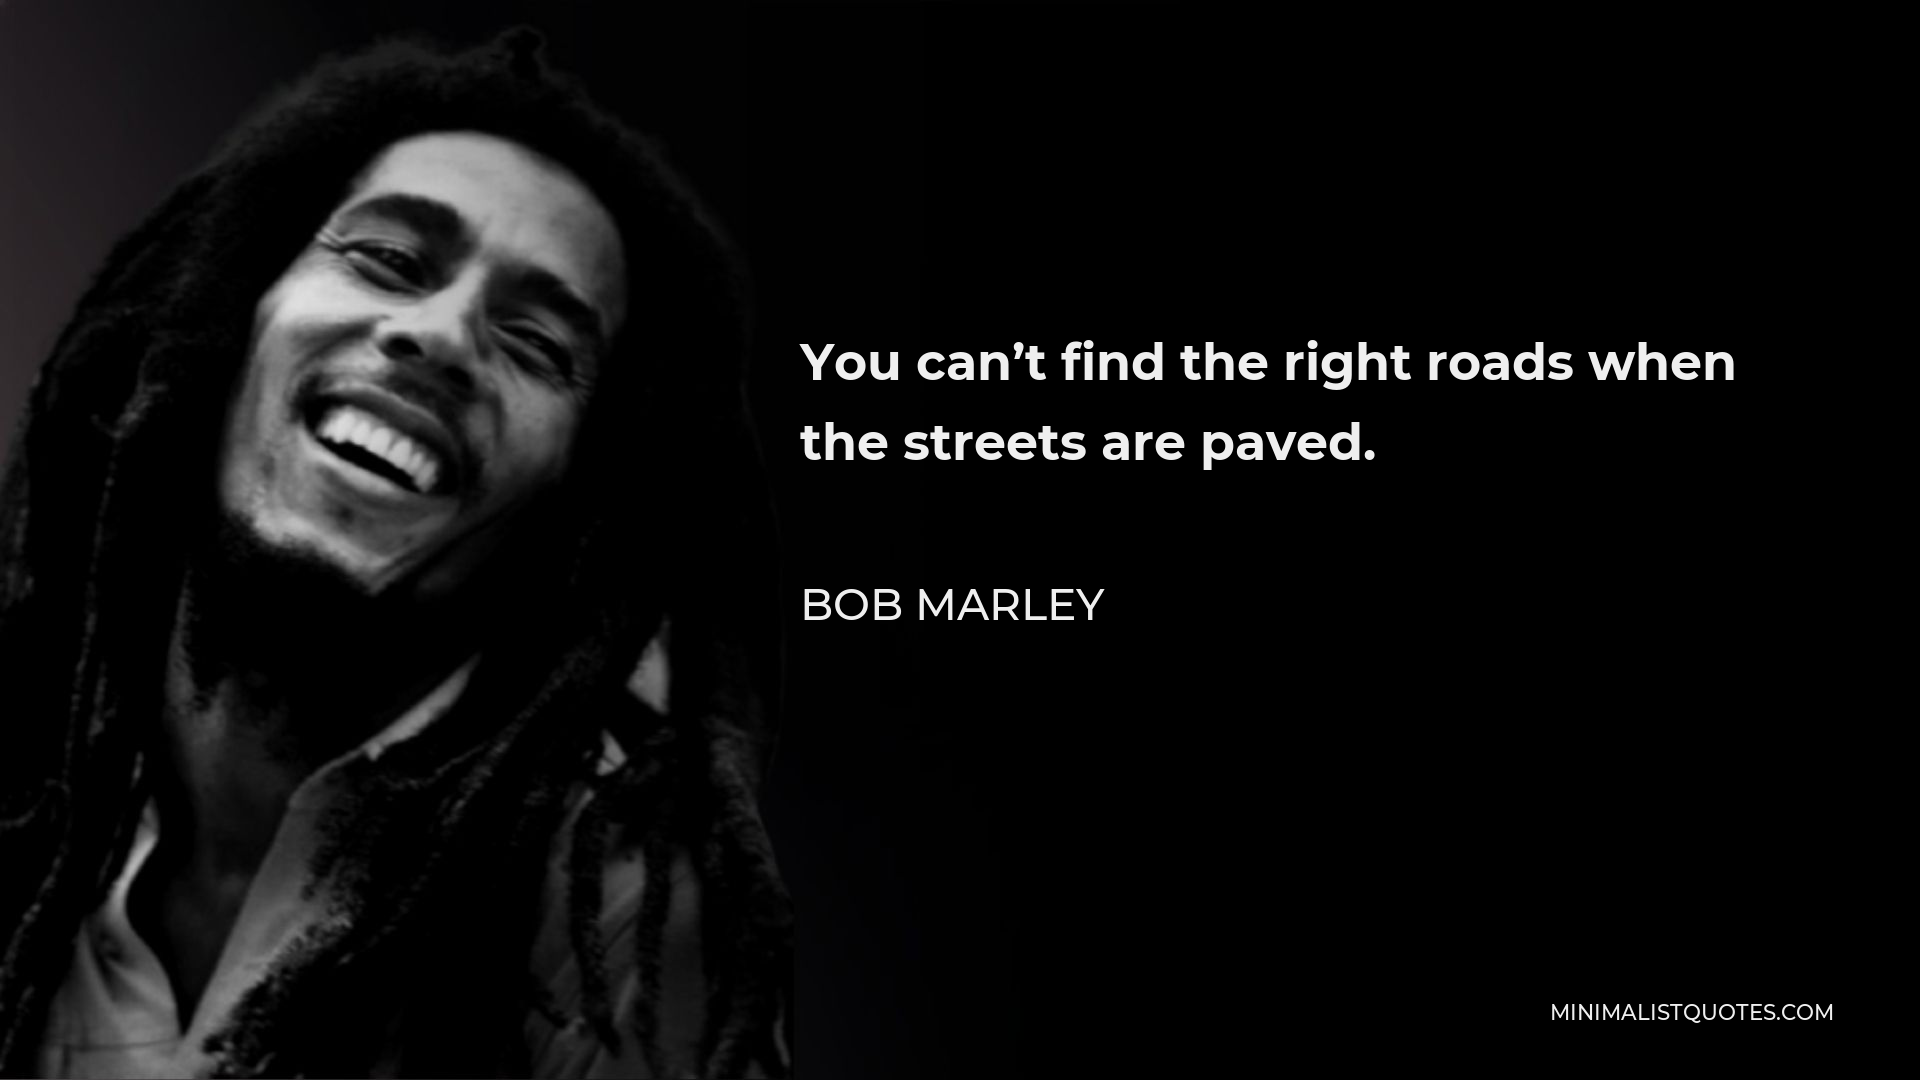 Bob Marley Quote - You can’t find the right roads when the streets are paved.